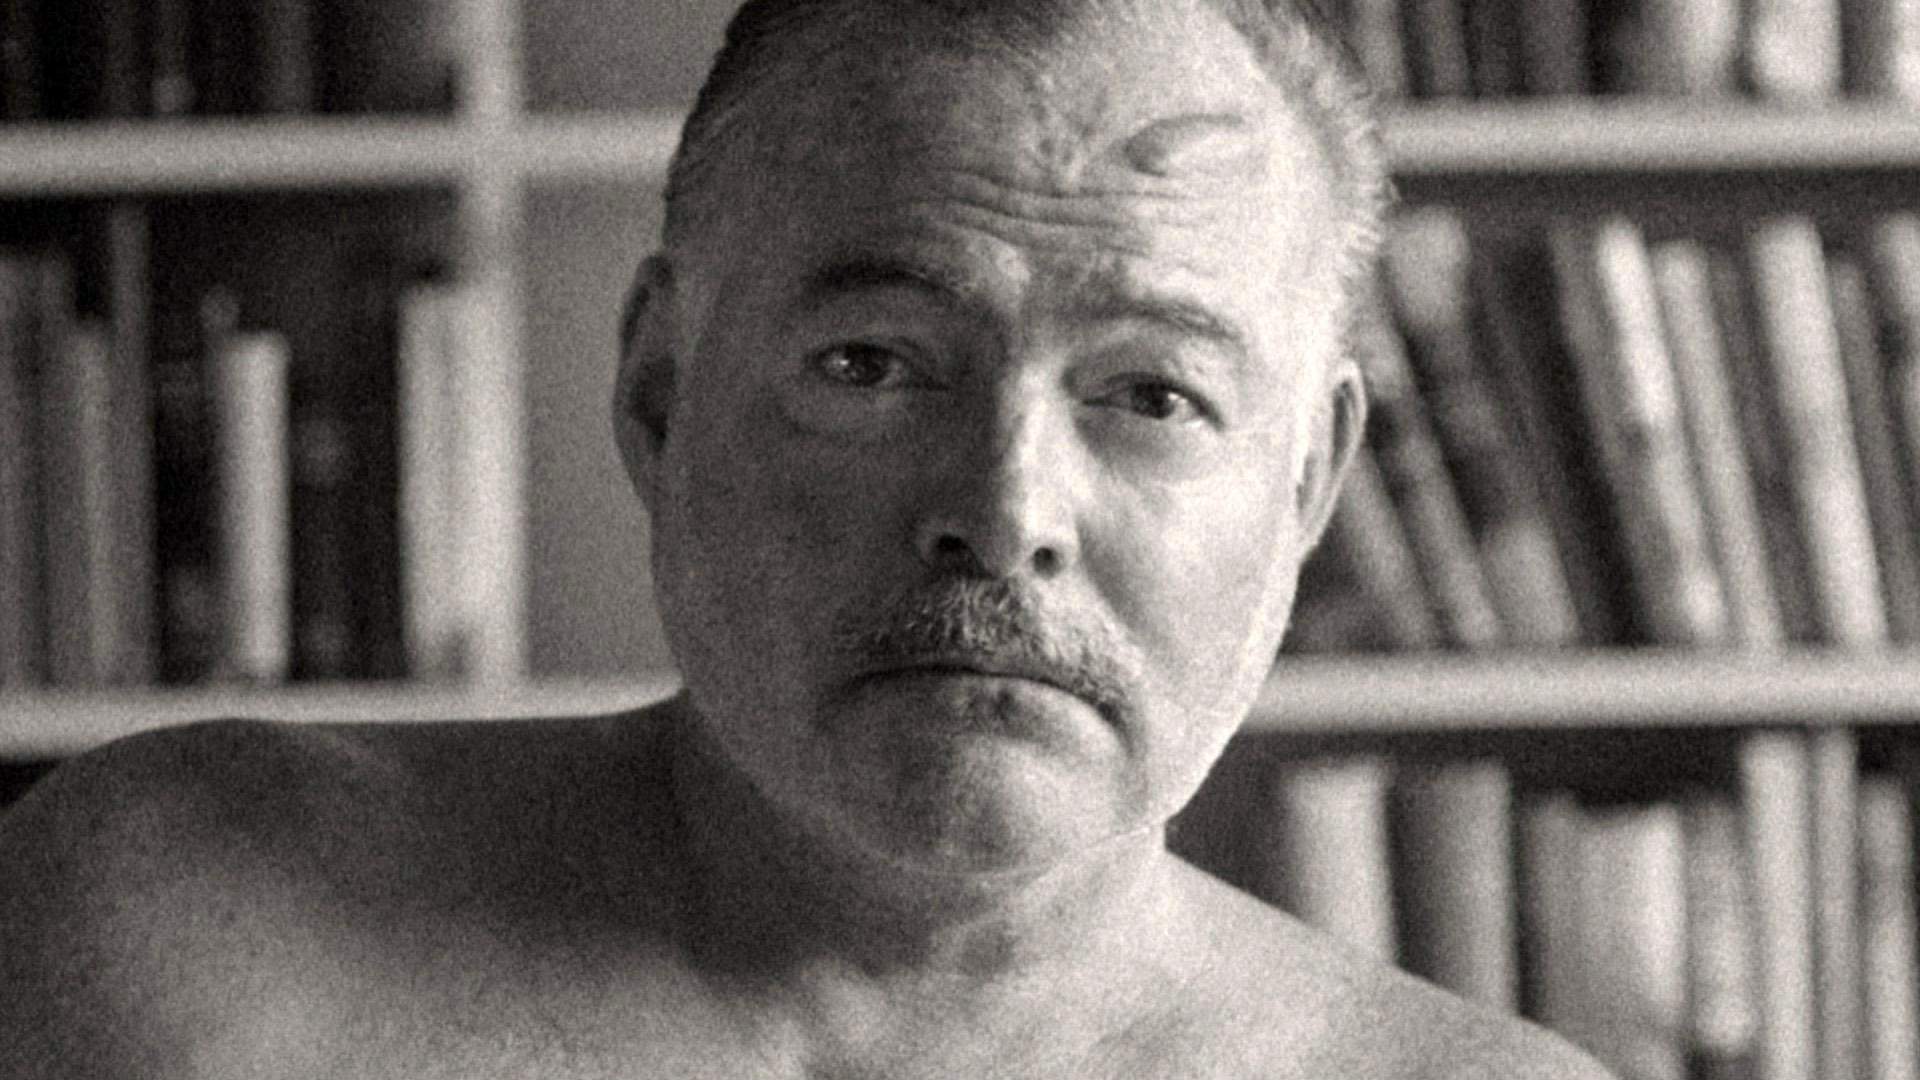 A still image of Ernest Hemingway from the new Ken Burns and Lynn Novick PBS documentary “Hemingway.” (Courtesy of PBS)